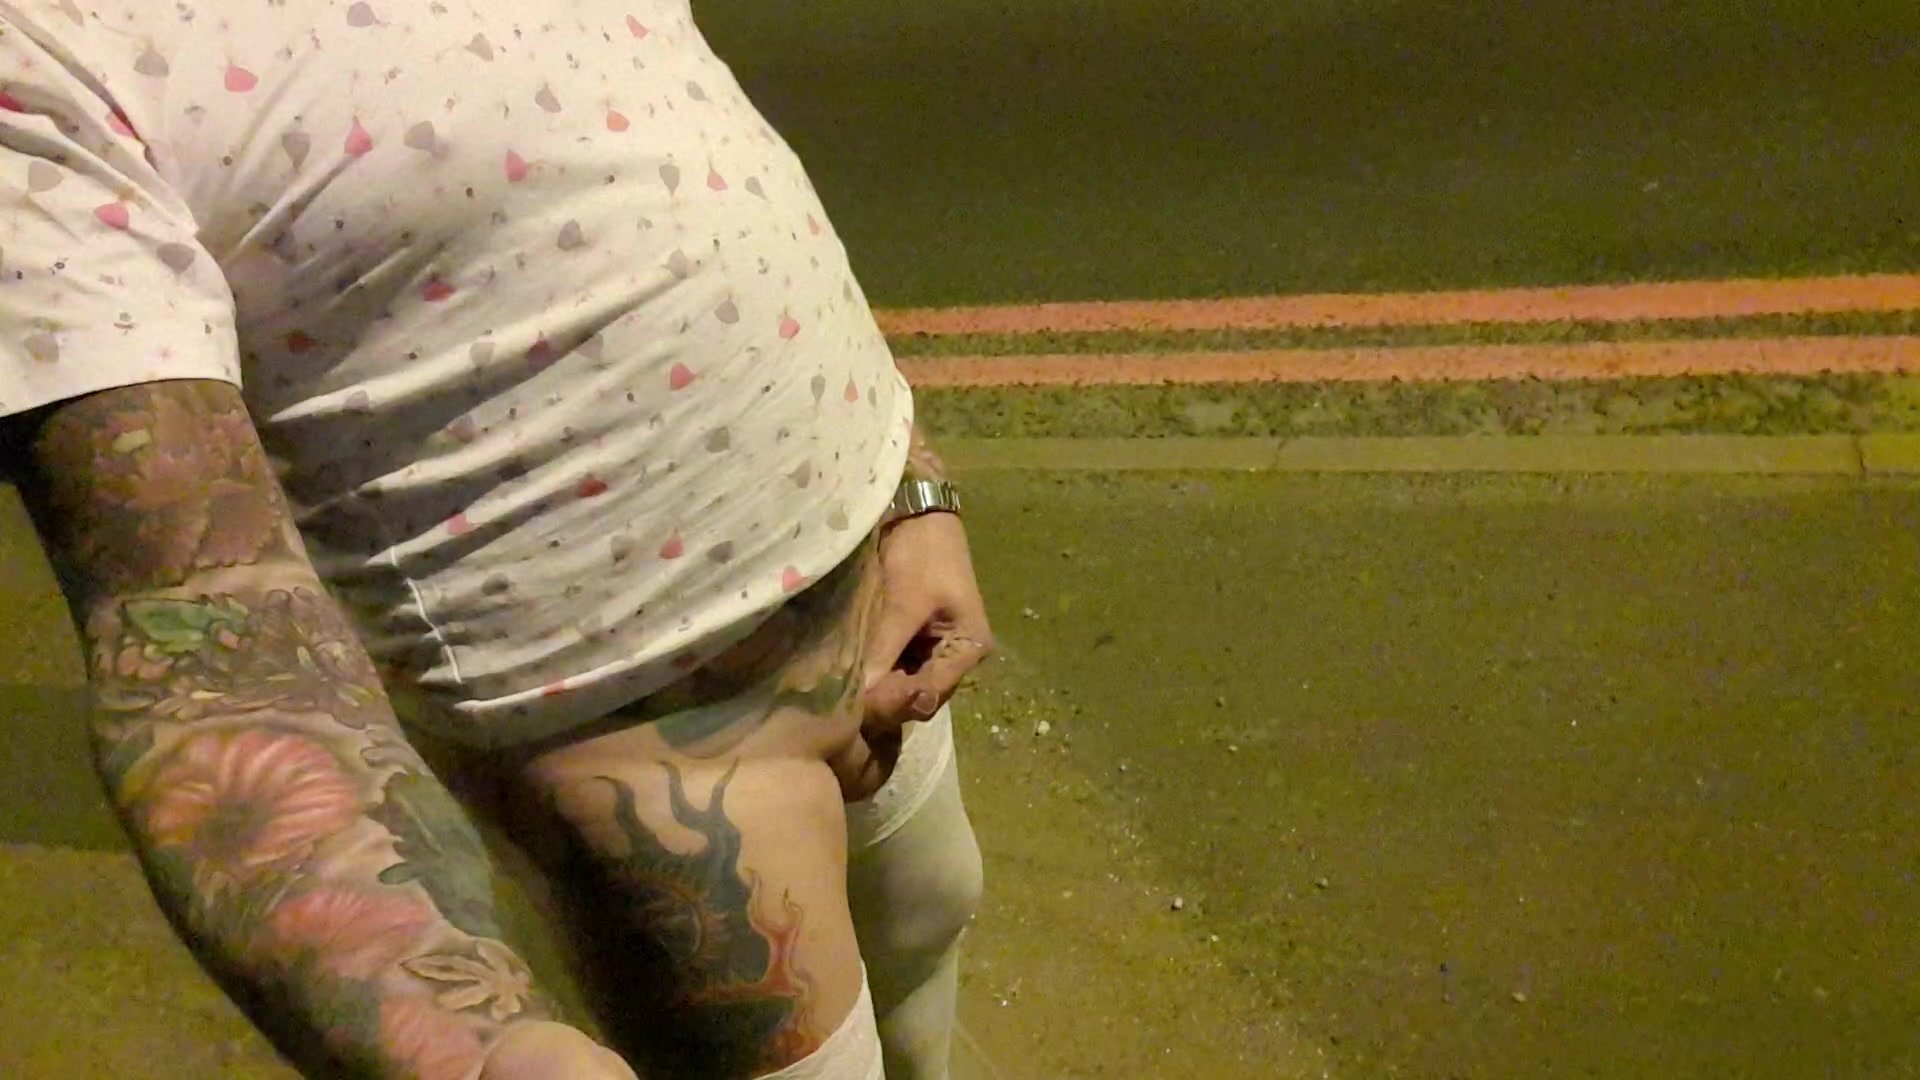 Showing my tiny cock and pissing by the main road